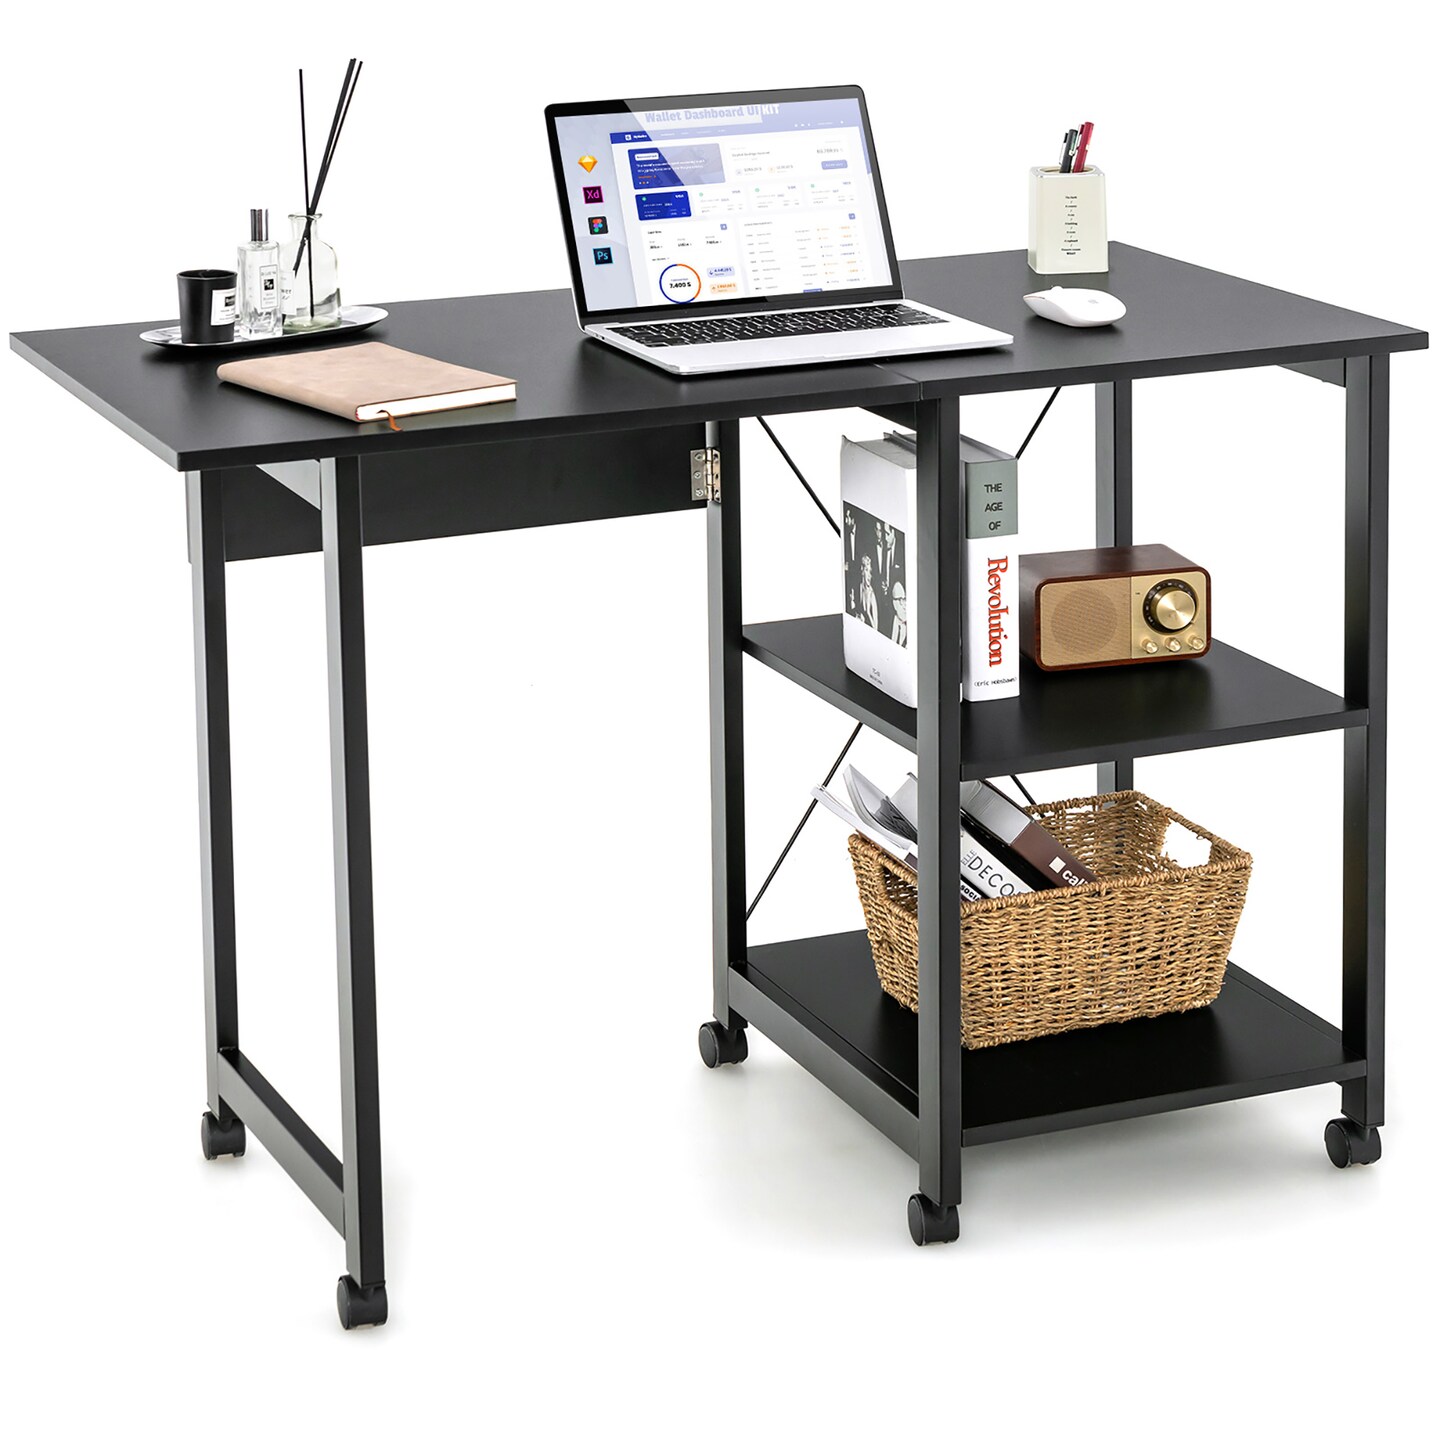 Costway Computer Desk PC Laptop Writing Table Workstation Student